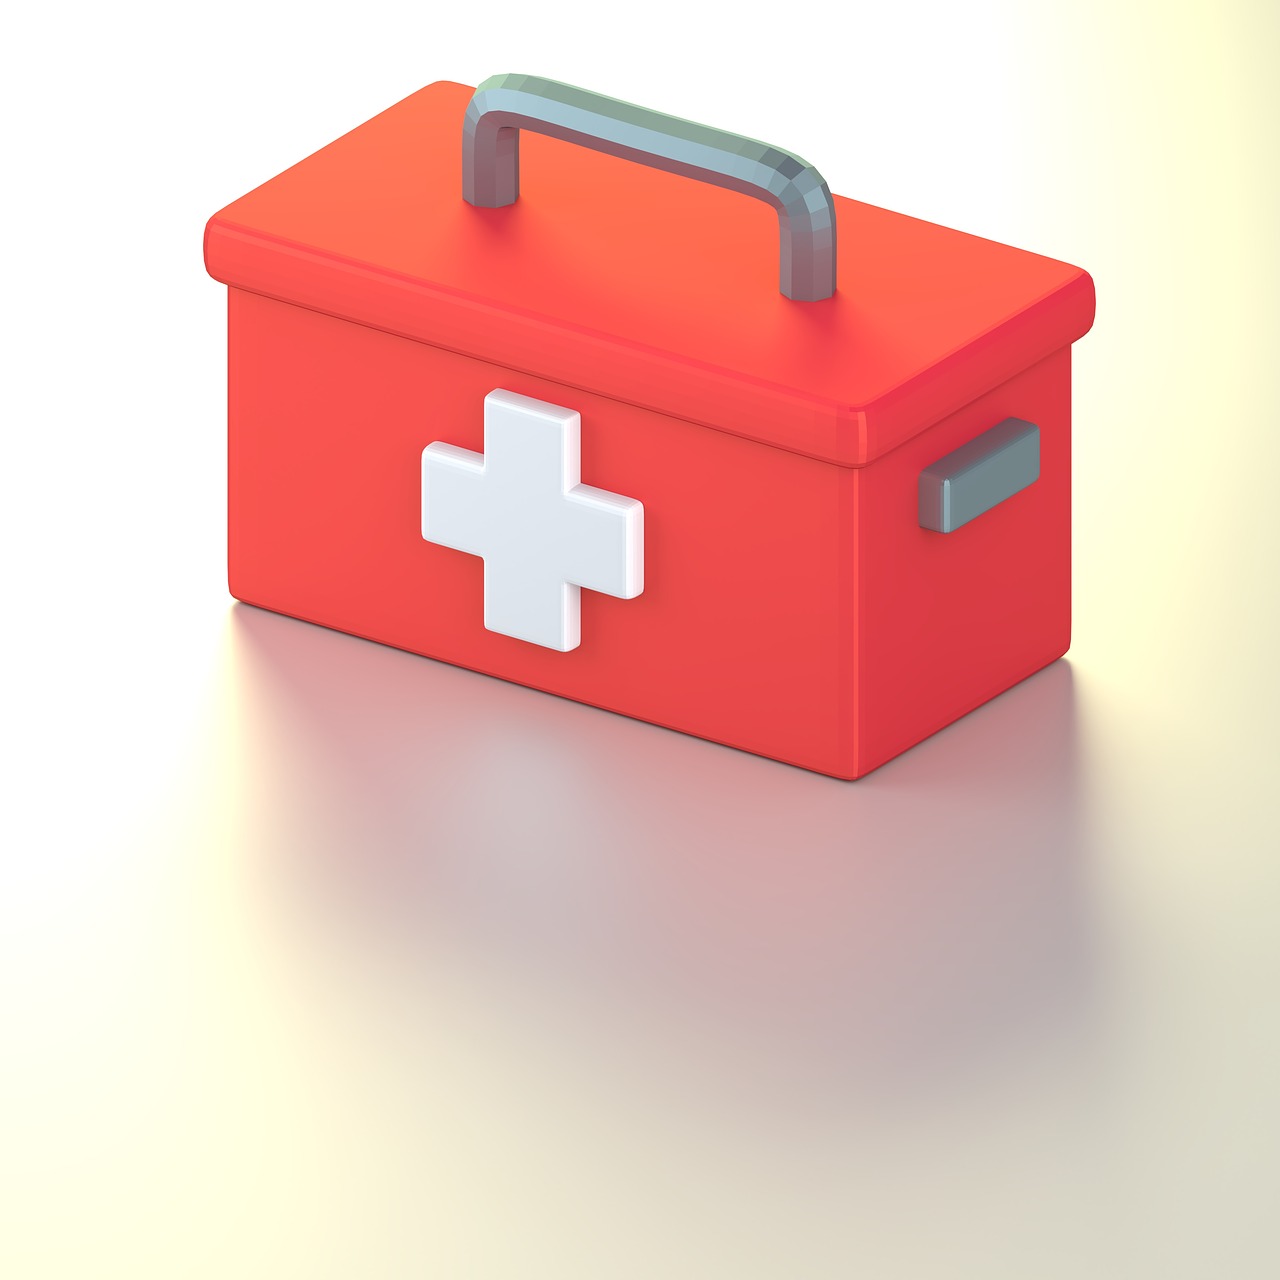 first-aid-kit-white-cross-emergency-help-free-image-from-needpix